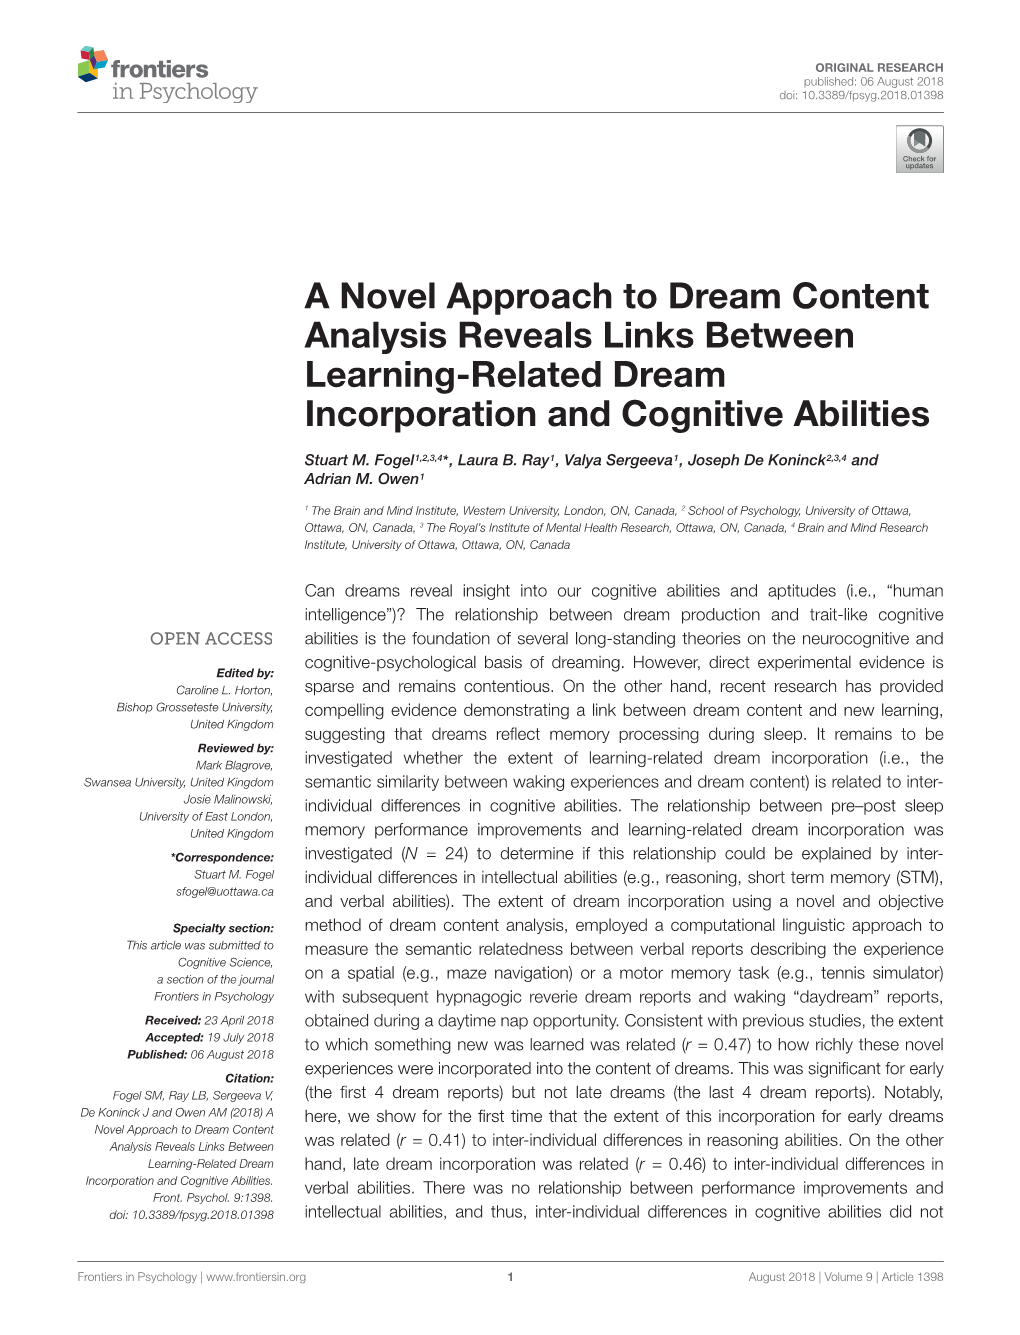 A Novel Approach to Dream Content Analysis Reveals Links Between Learning-Related Dream Incorporation and Cognitive Abilities